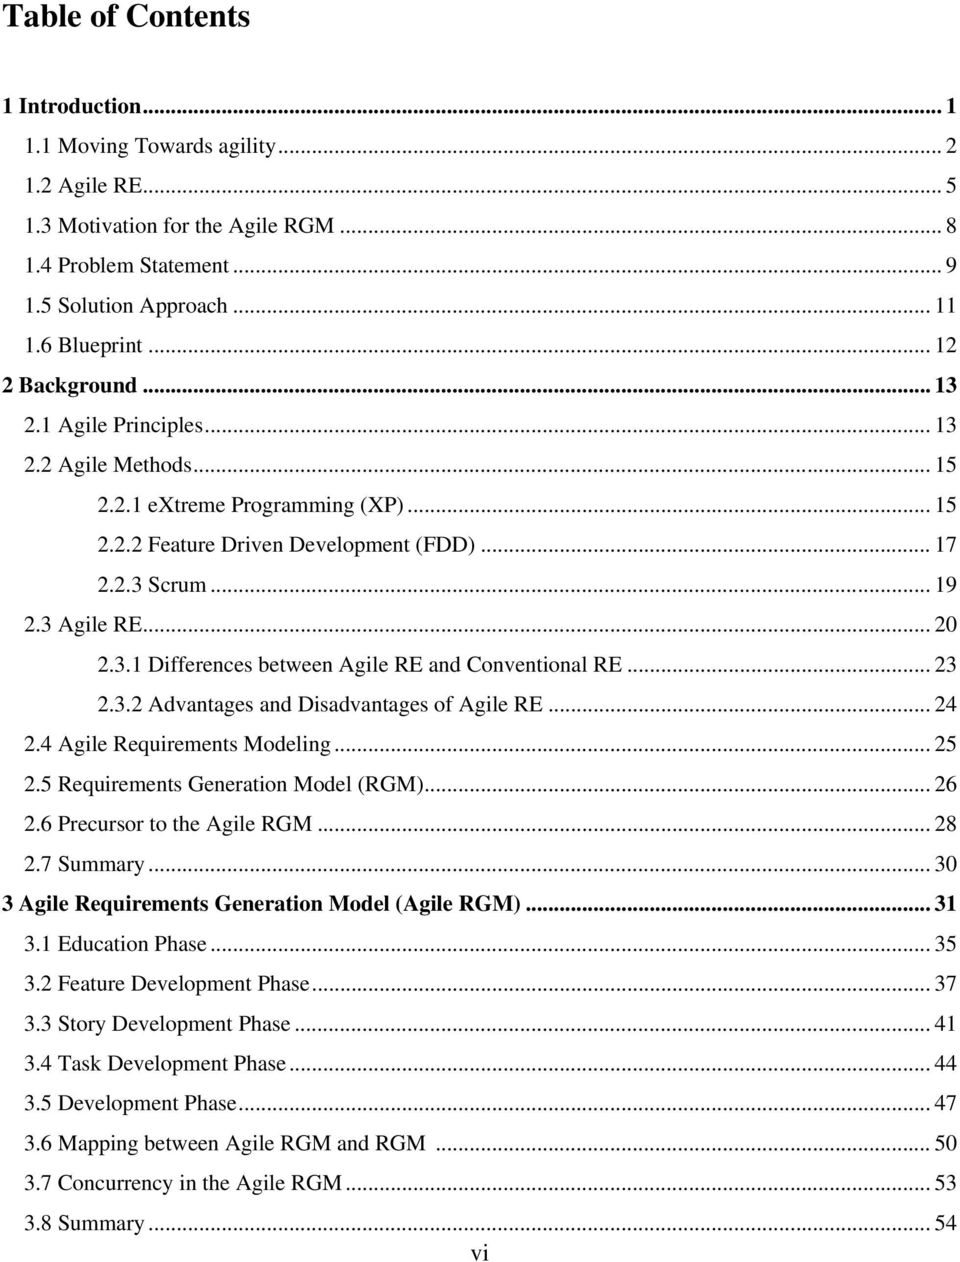 .. 23 2.3.2 Advantages and Disadvantages of Agile RE... 24 2.4 Agile Requirements Modeling... 25 2.5 Requirements Generation Model (RGM)... 26 2.6 Precursor to the Agile RGM... 28 2.7 Summary.